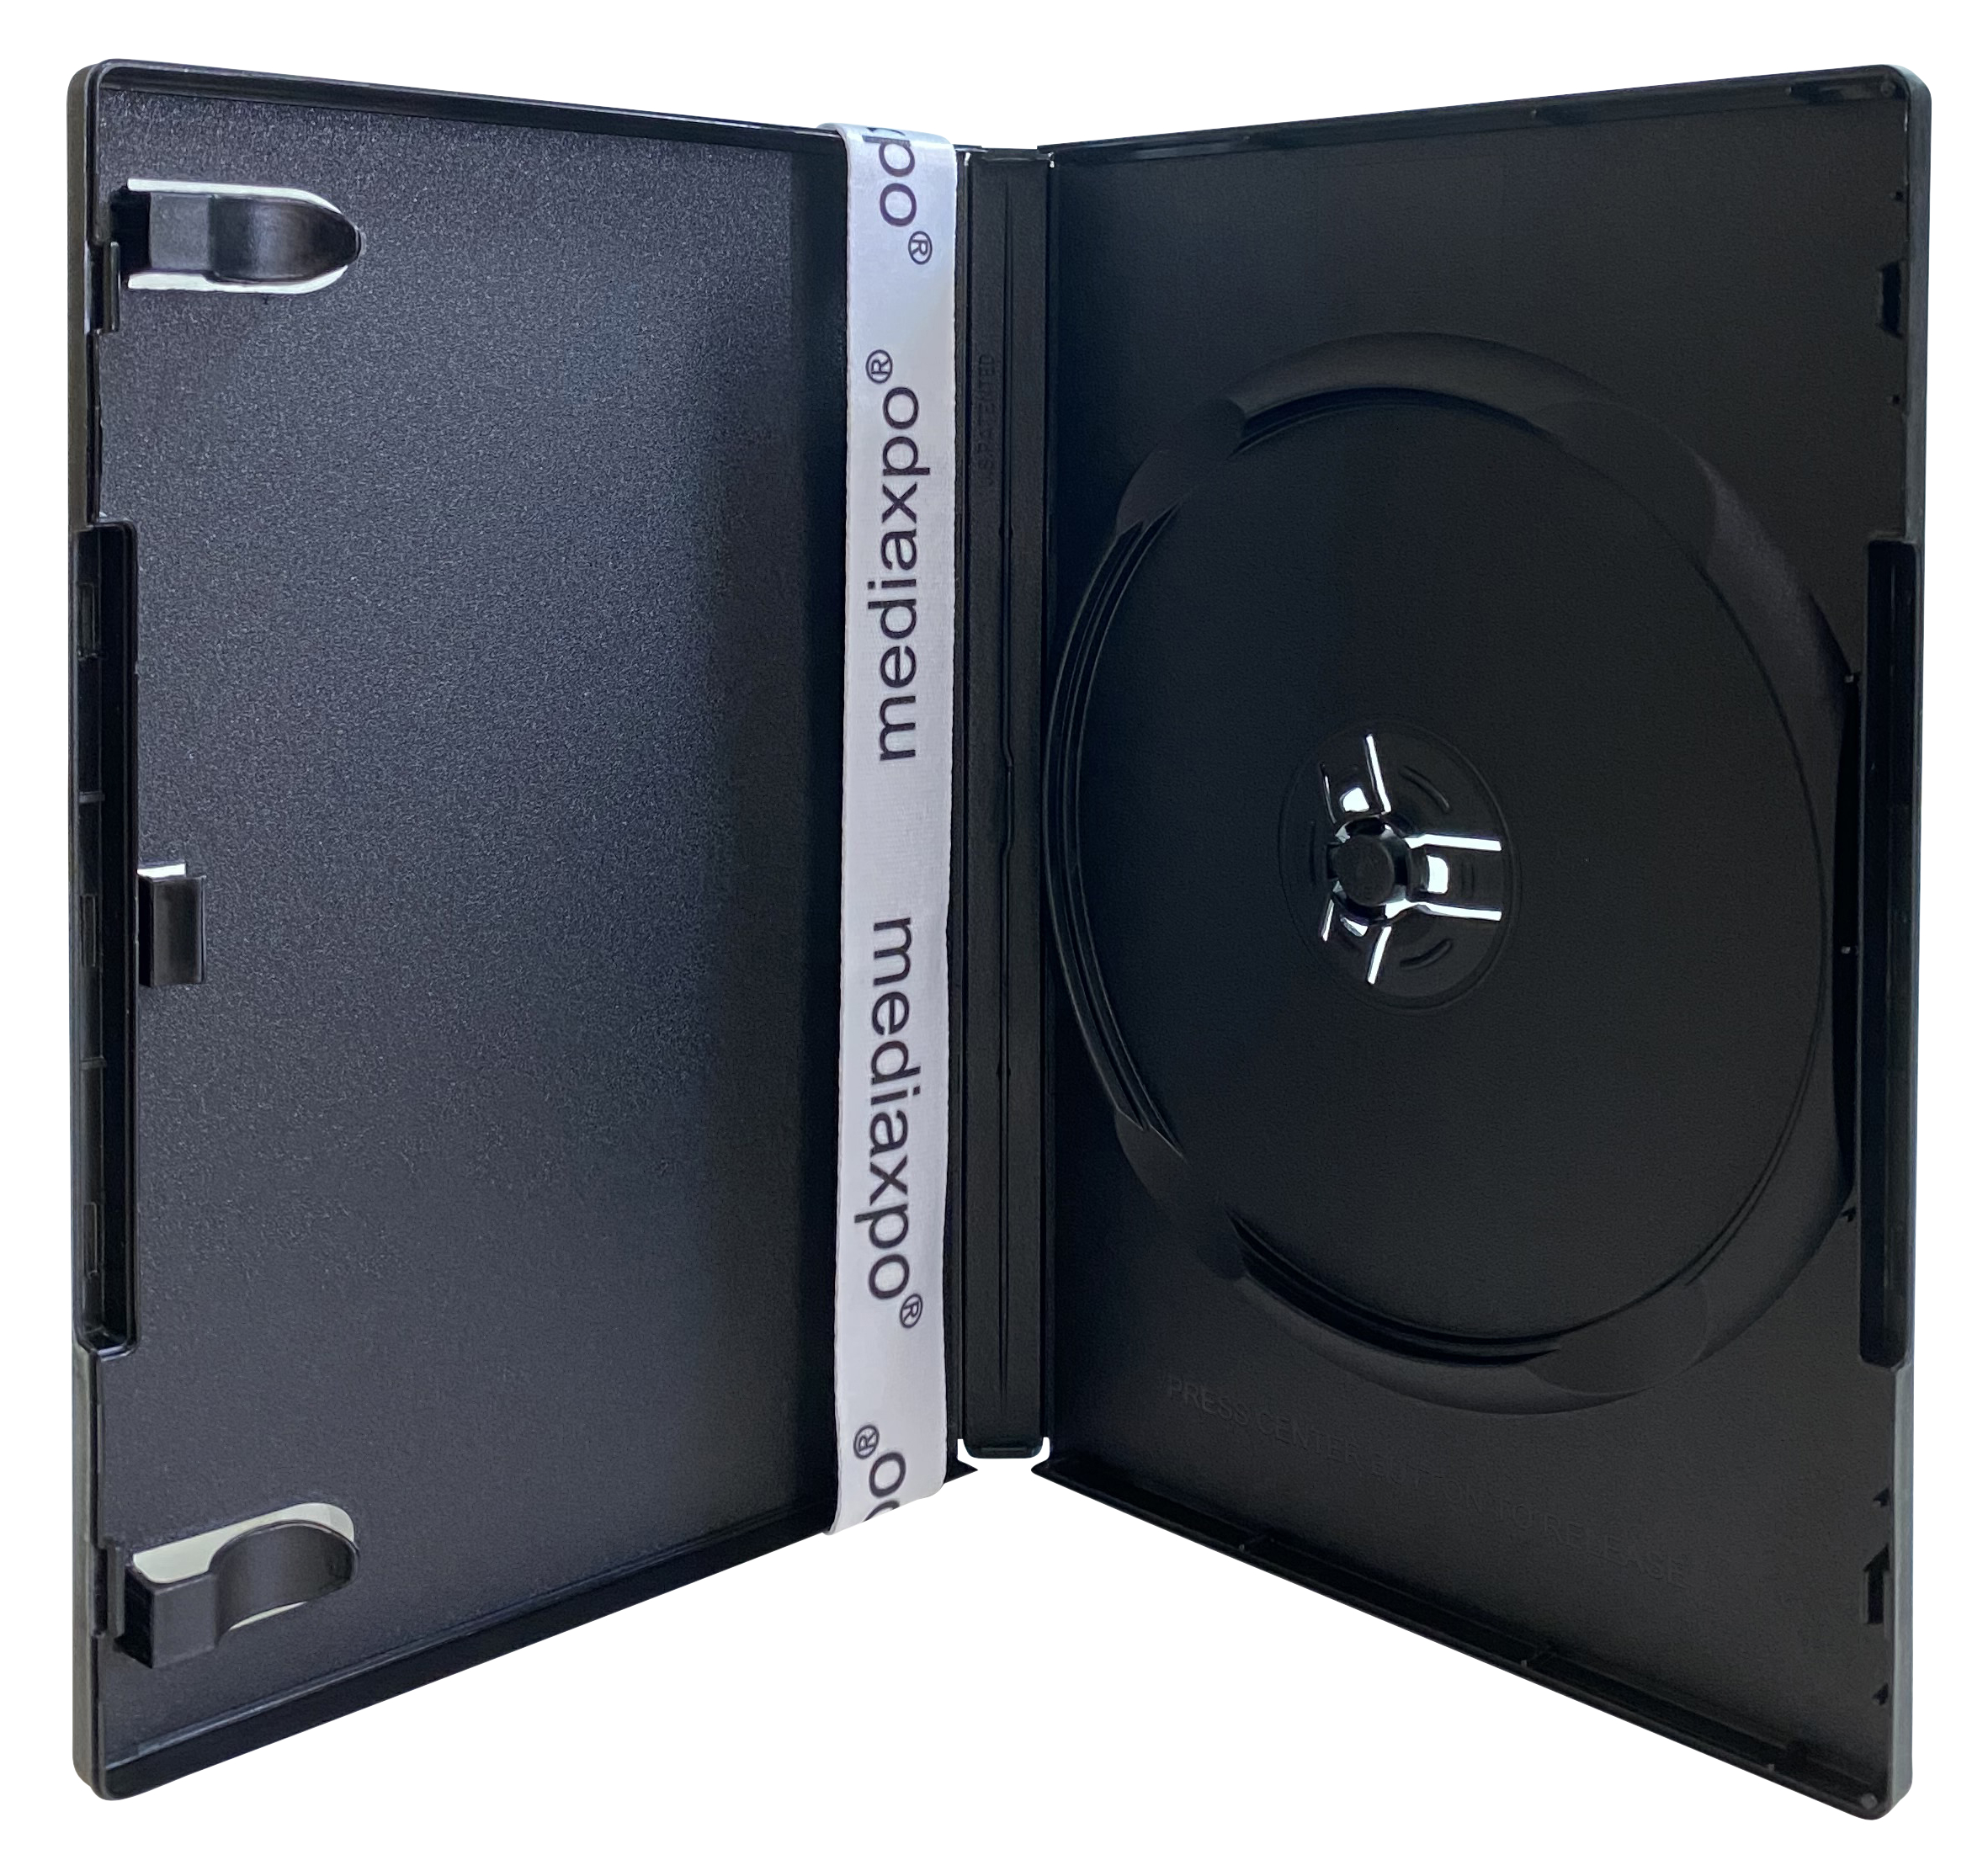 Image of ID 1214259179 100 PREMIUM STANDARD Black Single DVD Cases 14MM (100% New Material)